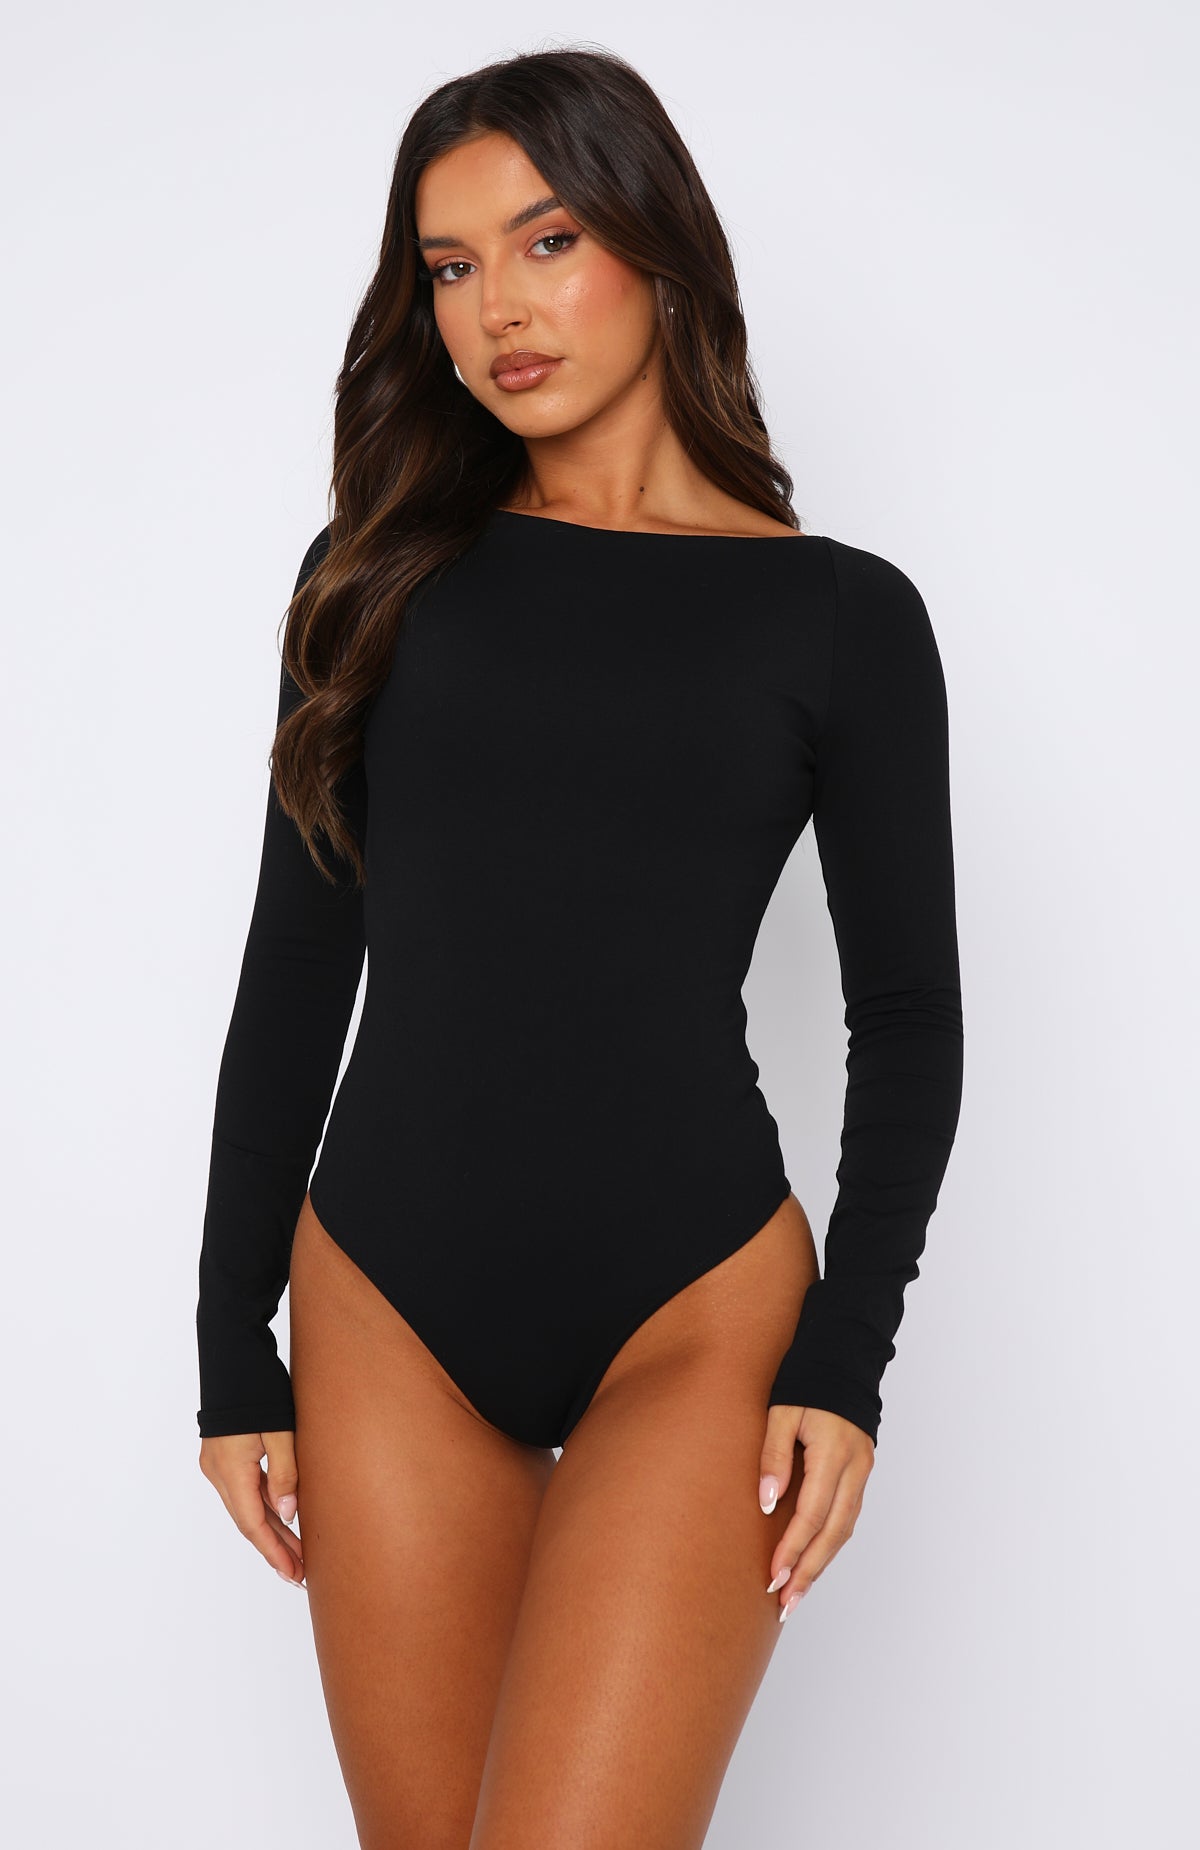 EXPRESS black long sleeve body suit Size M - $20 - From Sydney